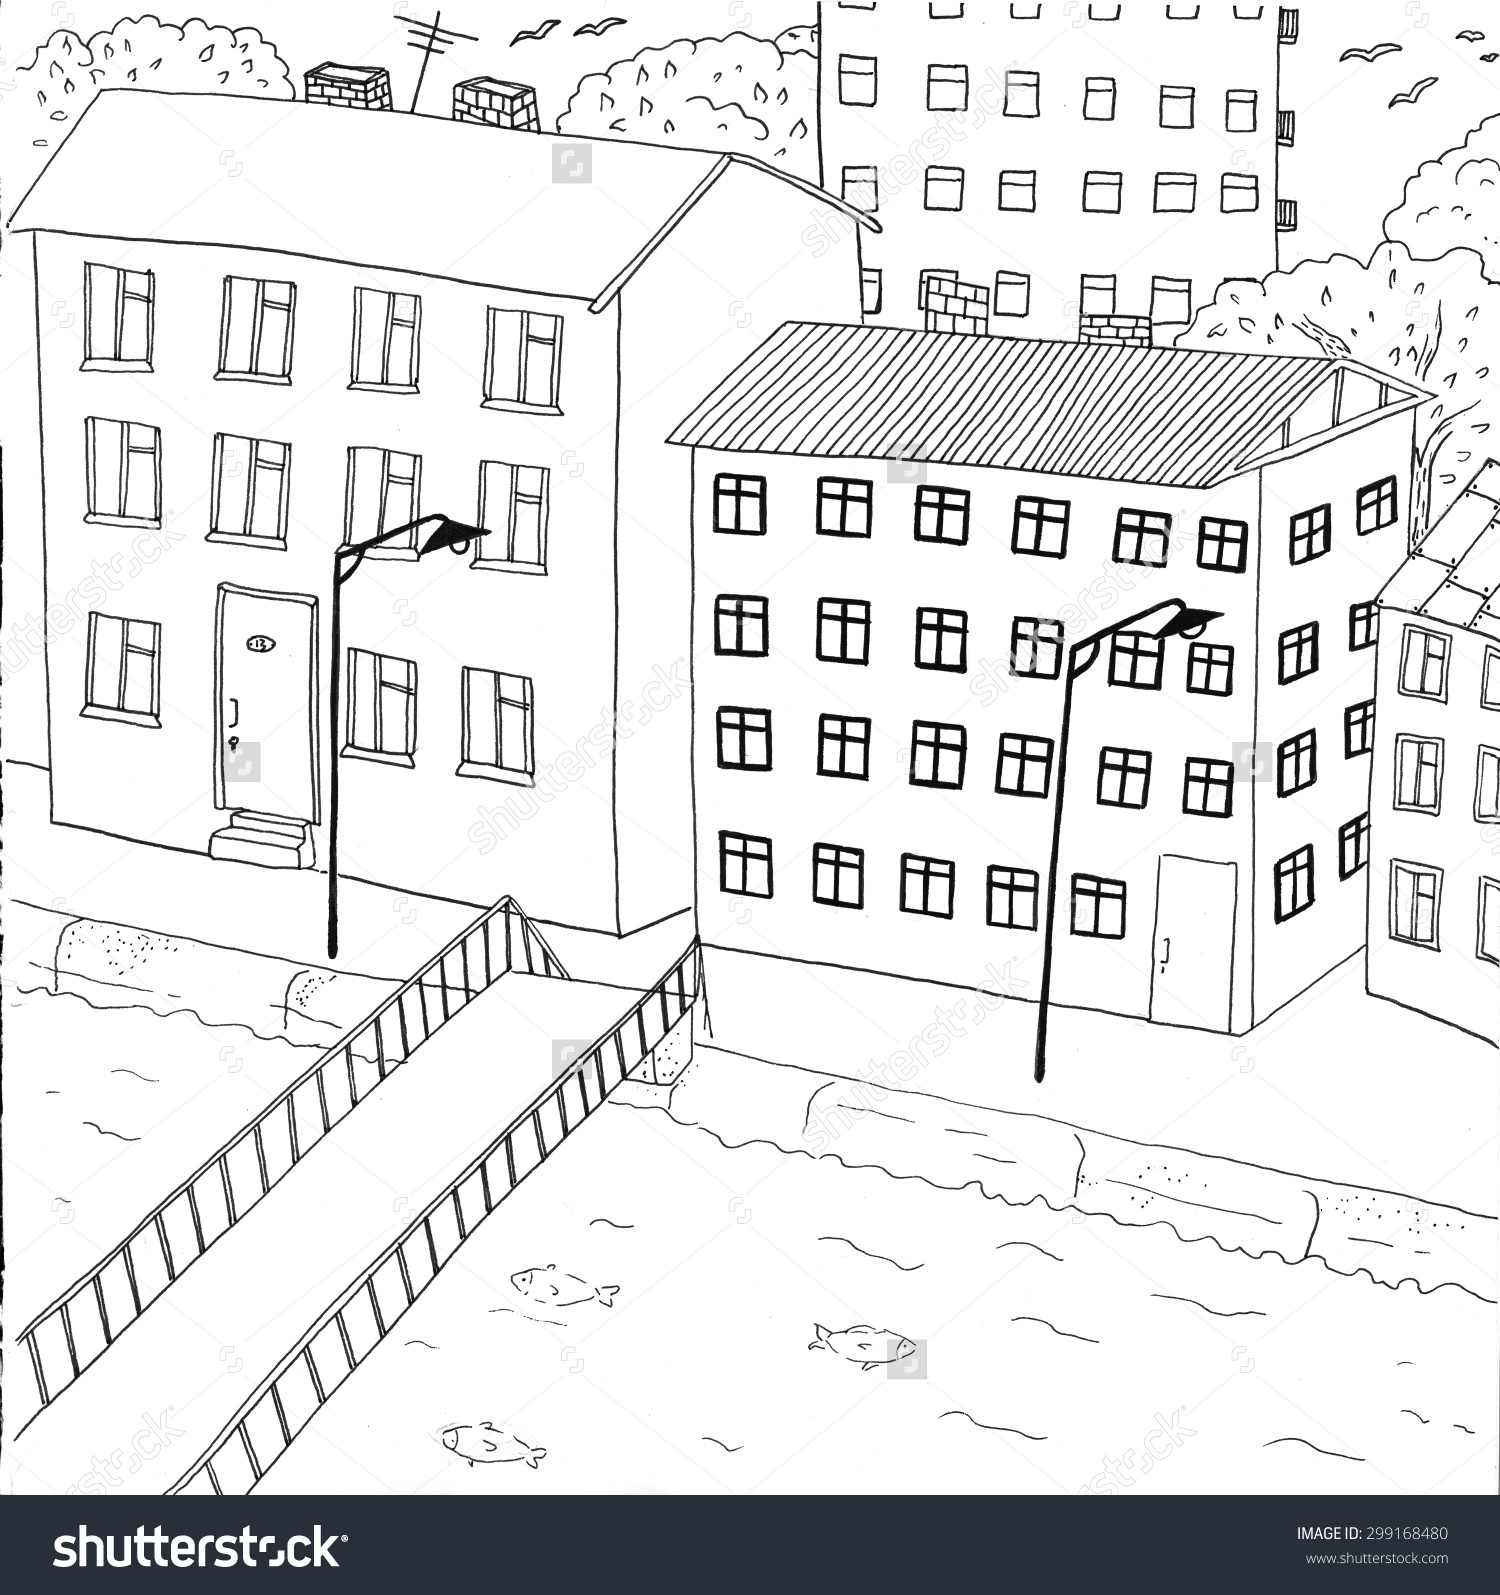 Canal coloring #3, Download drawings